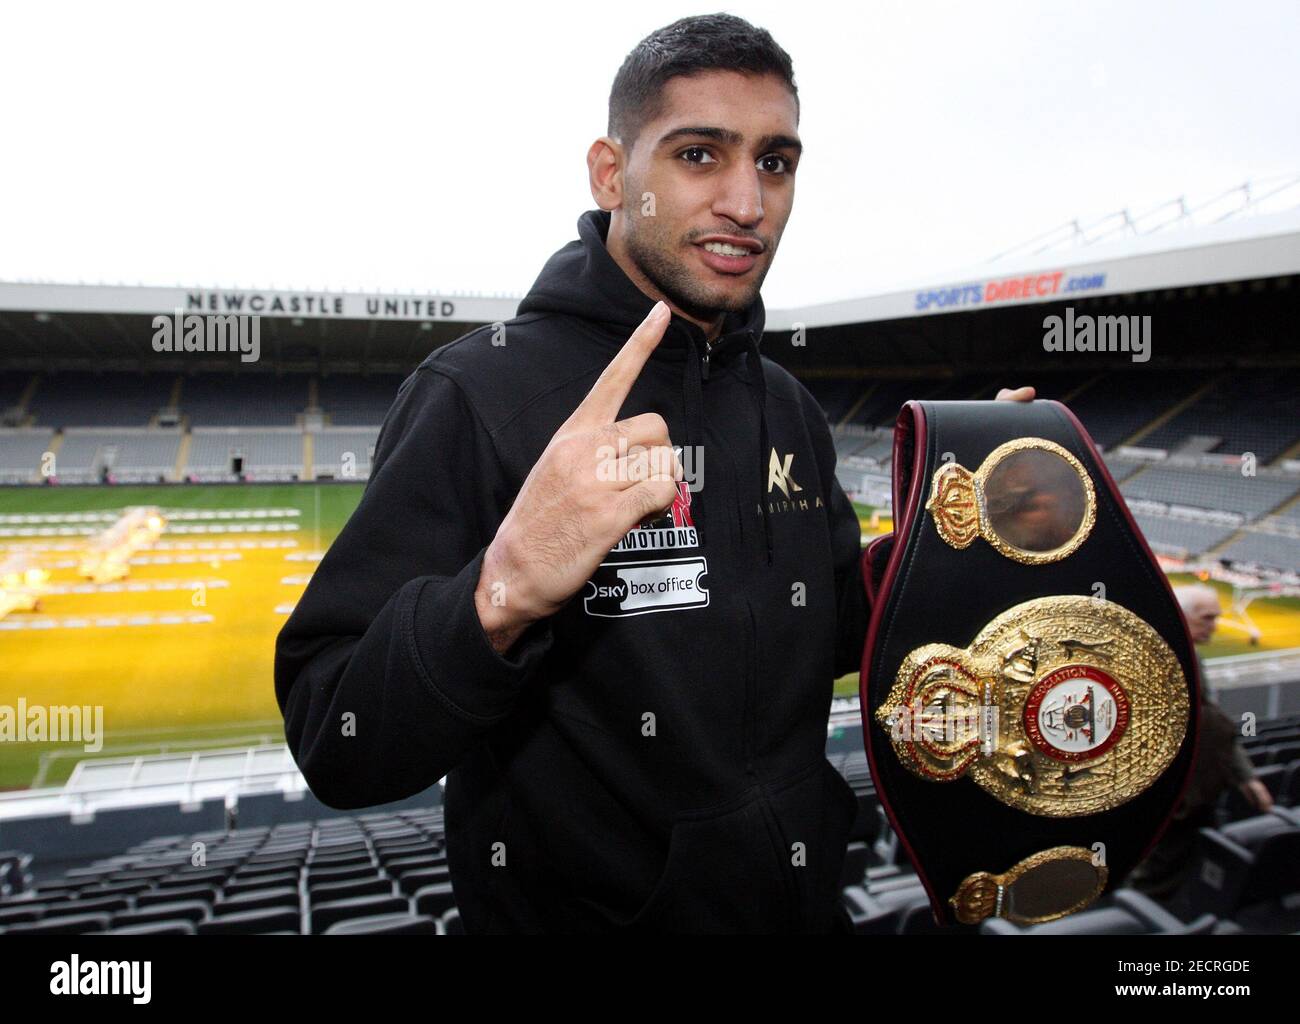 Boxing - Amir Khan & Dmitriy Salita Head-to-Head Press Conference - Newcastle United FC, St James' Park, Newcastle upon Tyne NE1 4ST - 3/12/09  Great Britain's Amir Khan   Mandatory Credit: Action Images / Lee Smith  Livepic Stock Photo